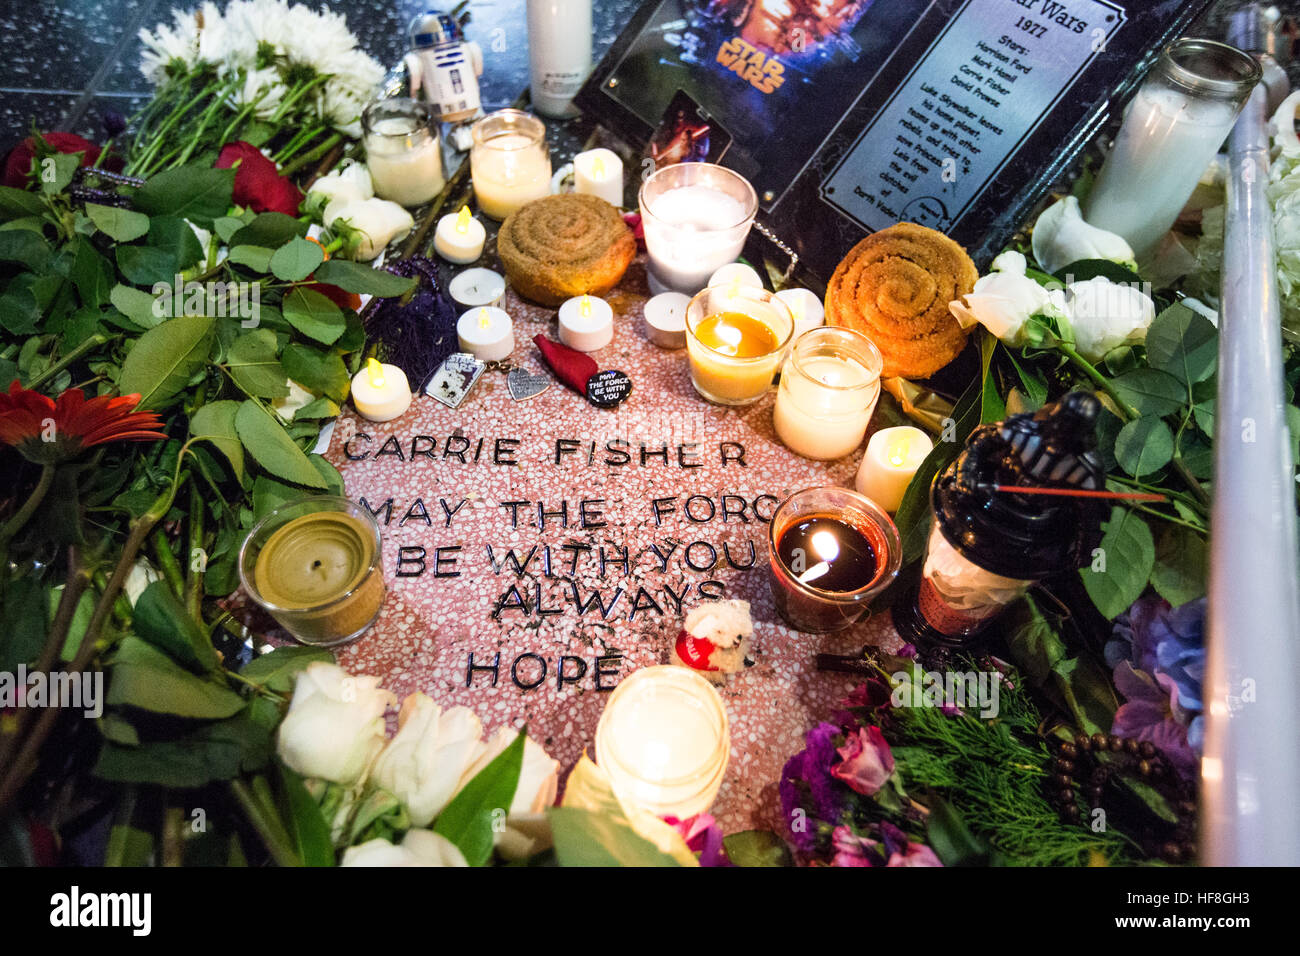 Hollywood, California, USA. 28th December, 2016. Actress Carrie Fisher, who passed away yesterday, is honored by fans with a makeshift star on the Hollywood Walk of Fame in Hollywood, California, USA.  As Carrie Fisher does not have an official star on the Hollywood Walk of Fame, her fans created one for her from a blank star near the theater where Star Wars movies have had their premieres. Along with flowers, light sabers, and momentos, there is a cinnamon bun that is symbolic of her hairdo in the role of 'Princess Leia' in the first Star Wars movie.  Credit: Sheri Determan/Alamy Live News Stock Photo